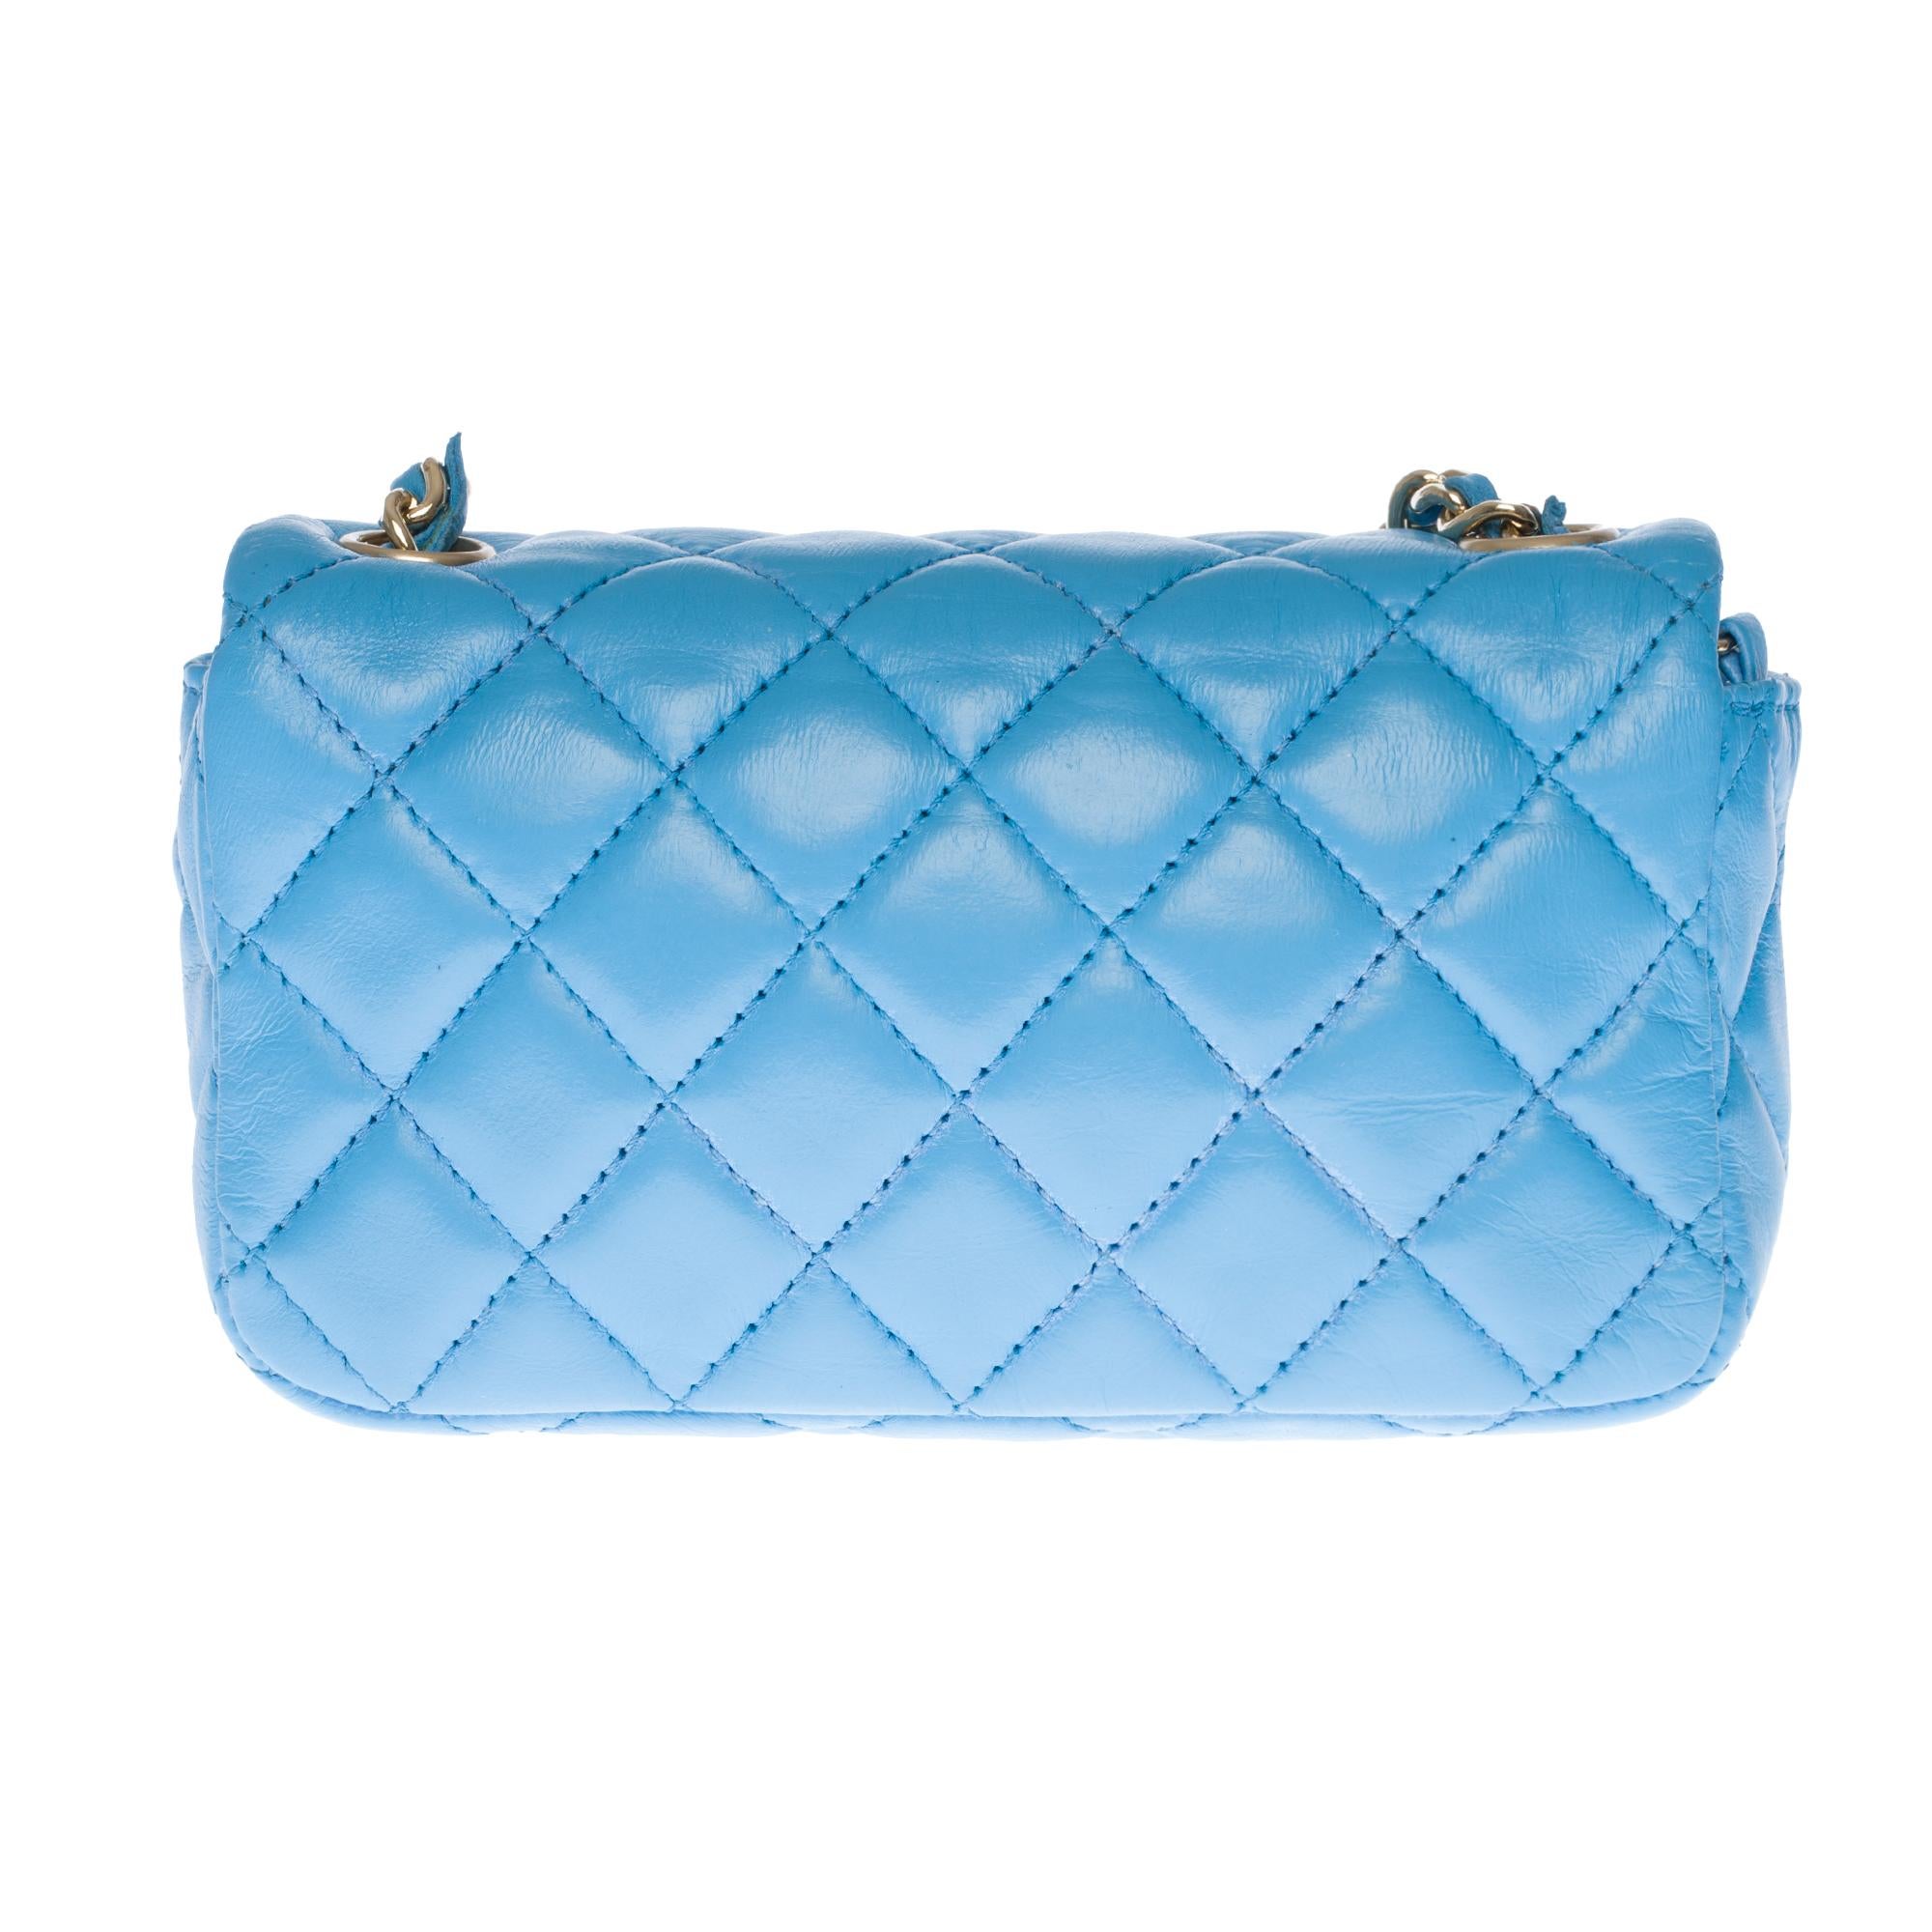 Gorgeous and very sought after Chanel Valentine Mini Charms Flap bag in blue turquoise quilted leather, silver metal shoulder strap handle decorated with heart-patterned charms (Valentine charms) intertwined with blue leather for a shoulder or